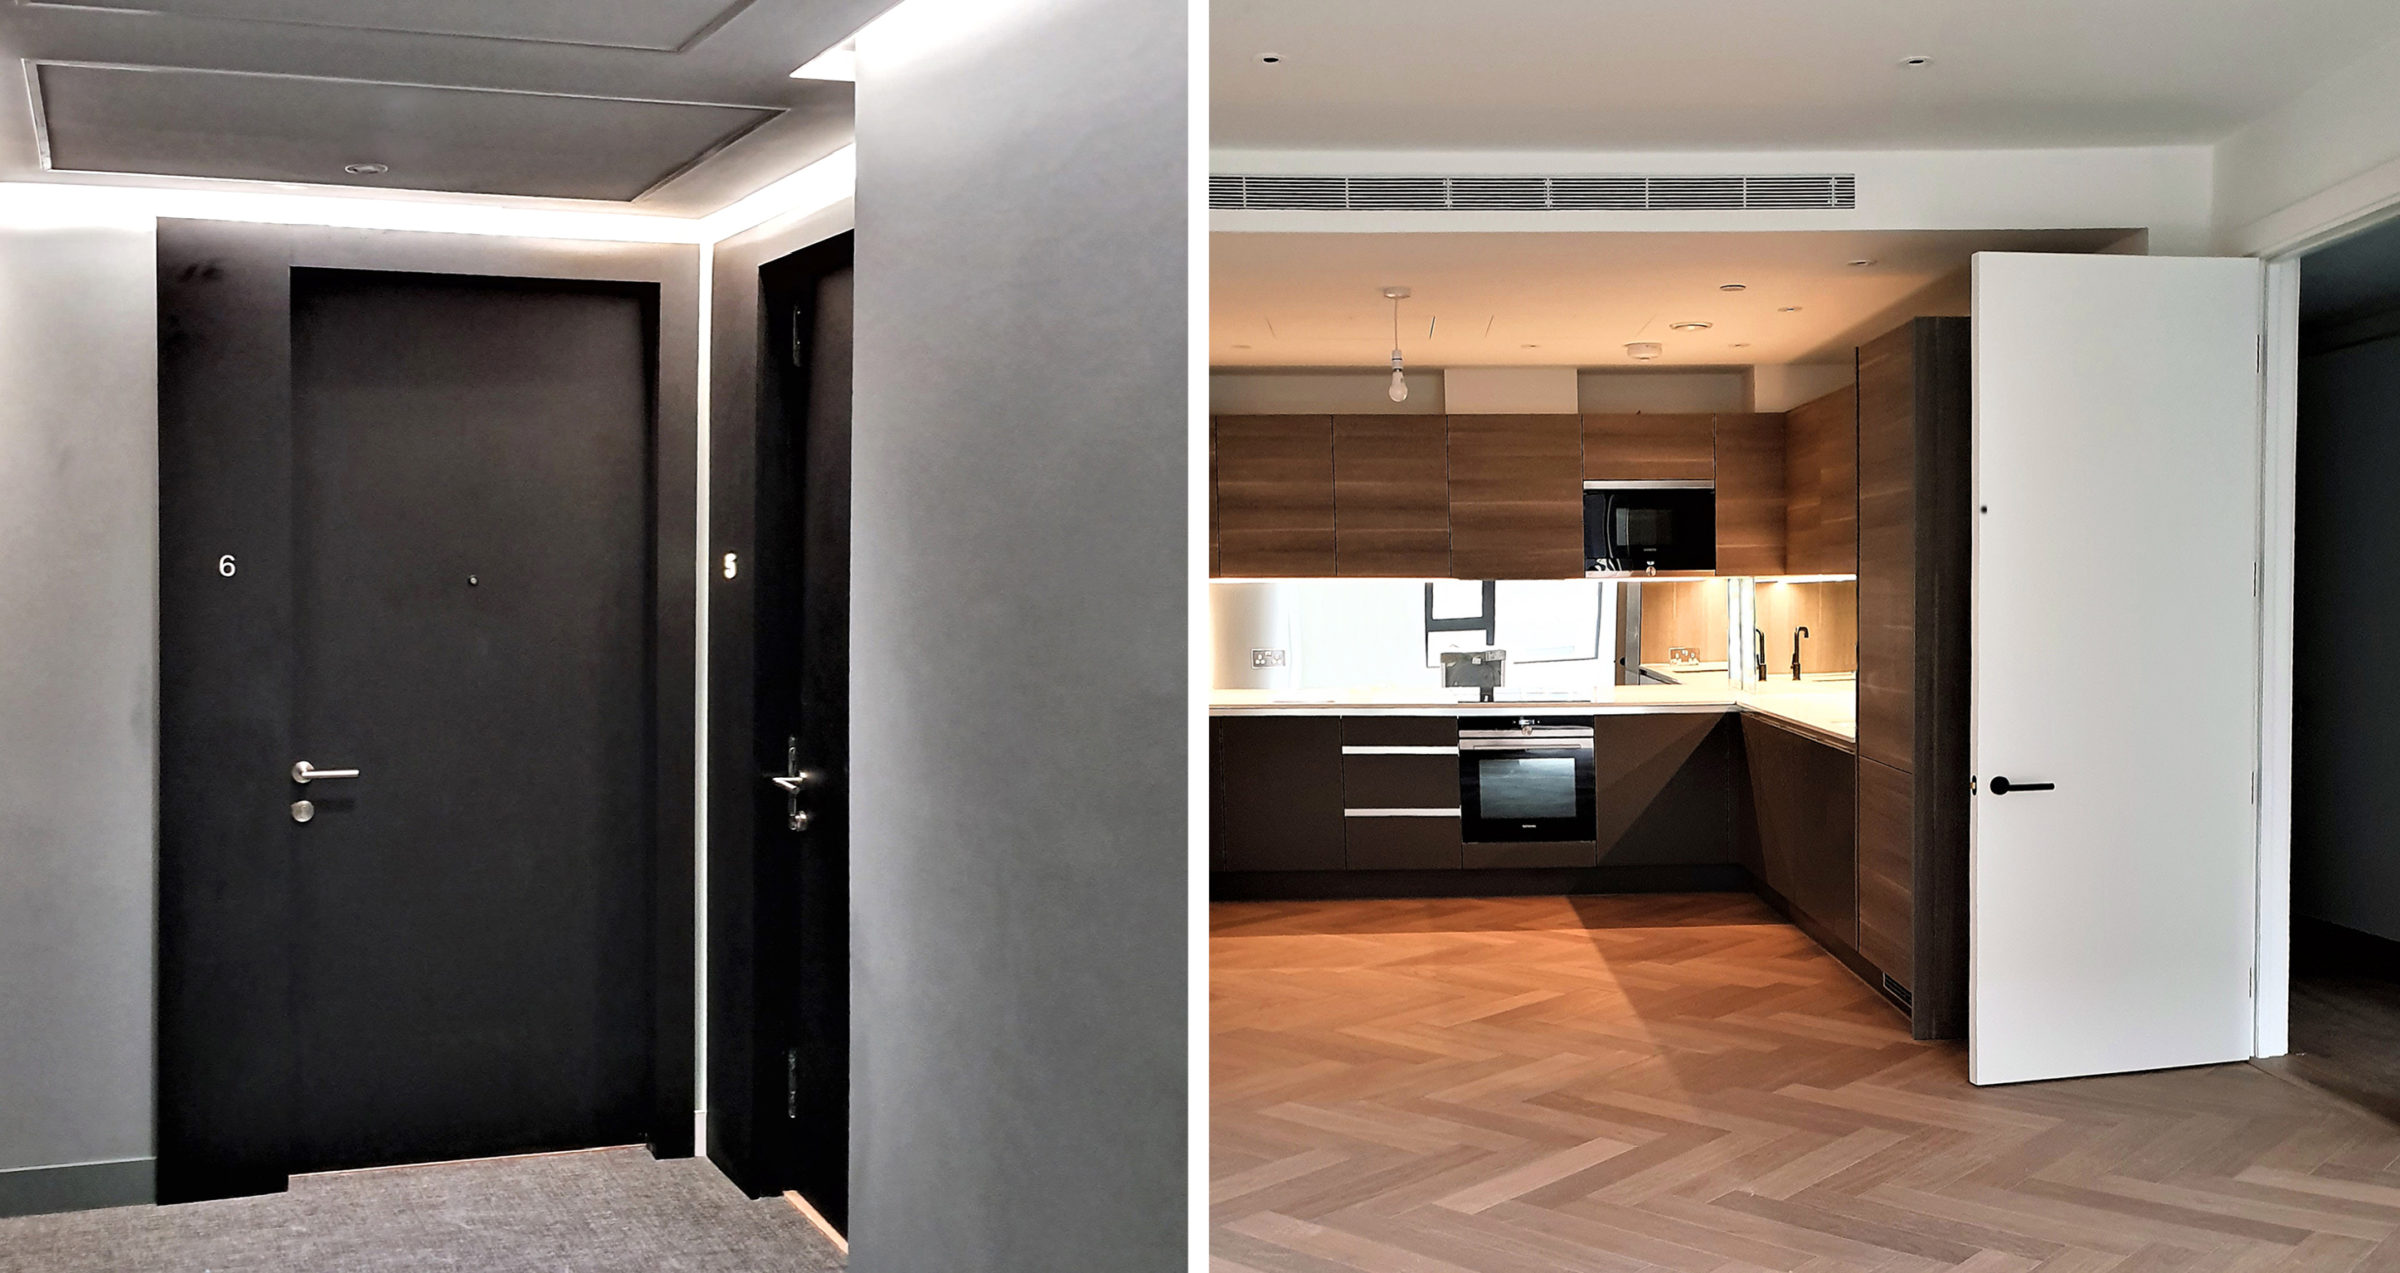 Stylish Joinery Installation for the HKR Hoxton Development